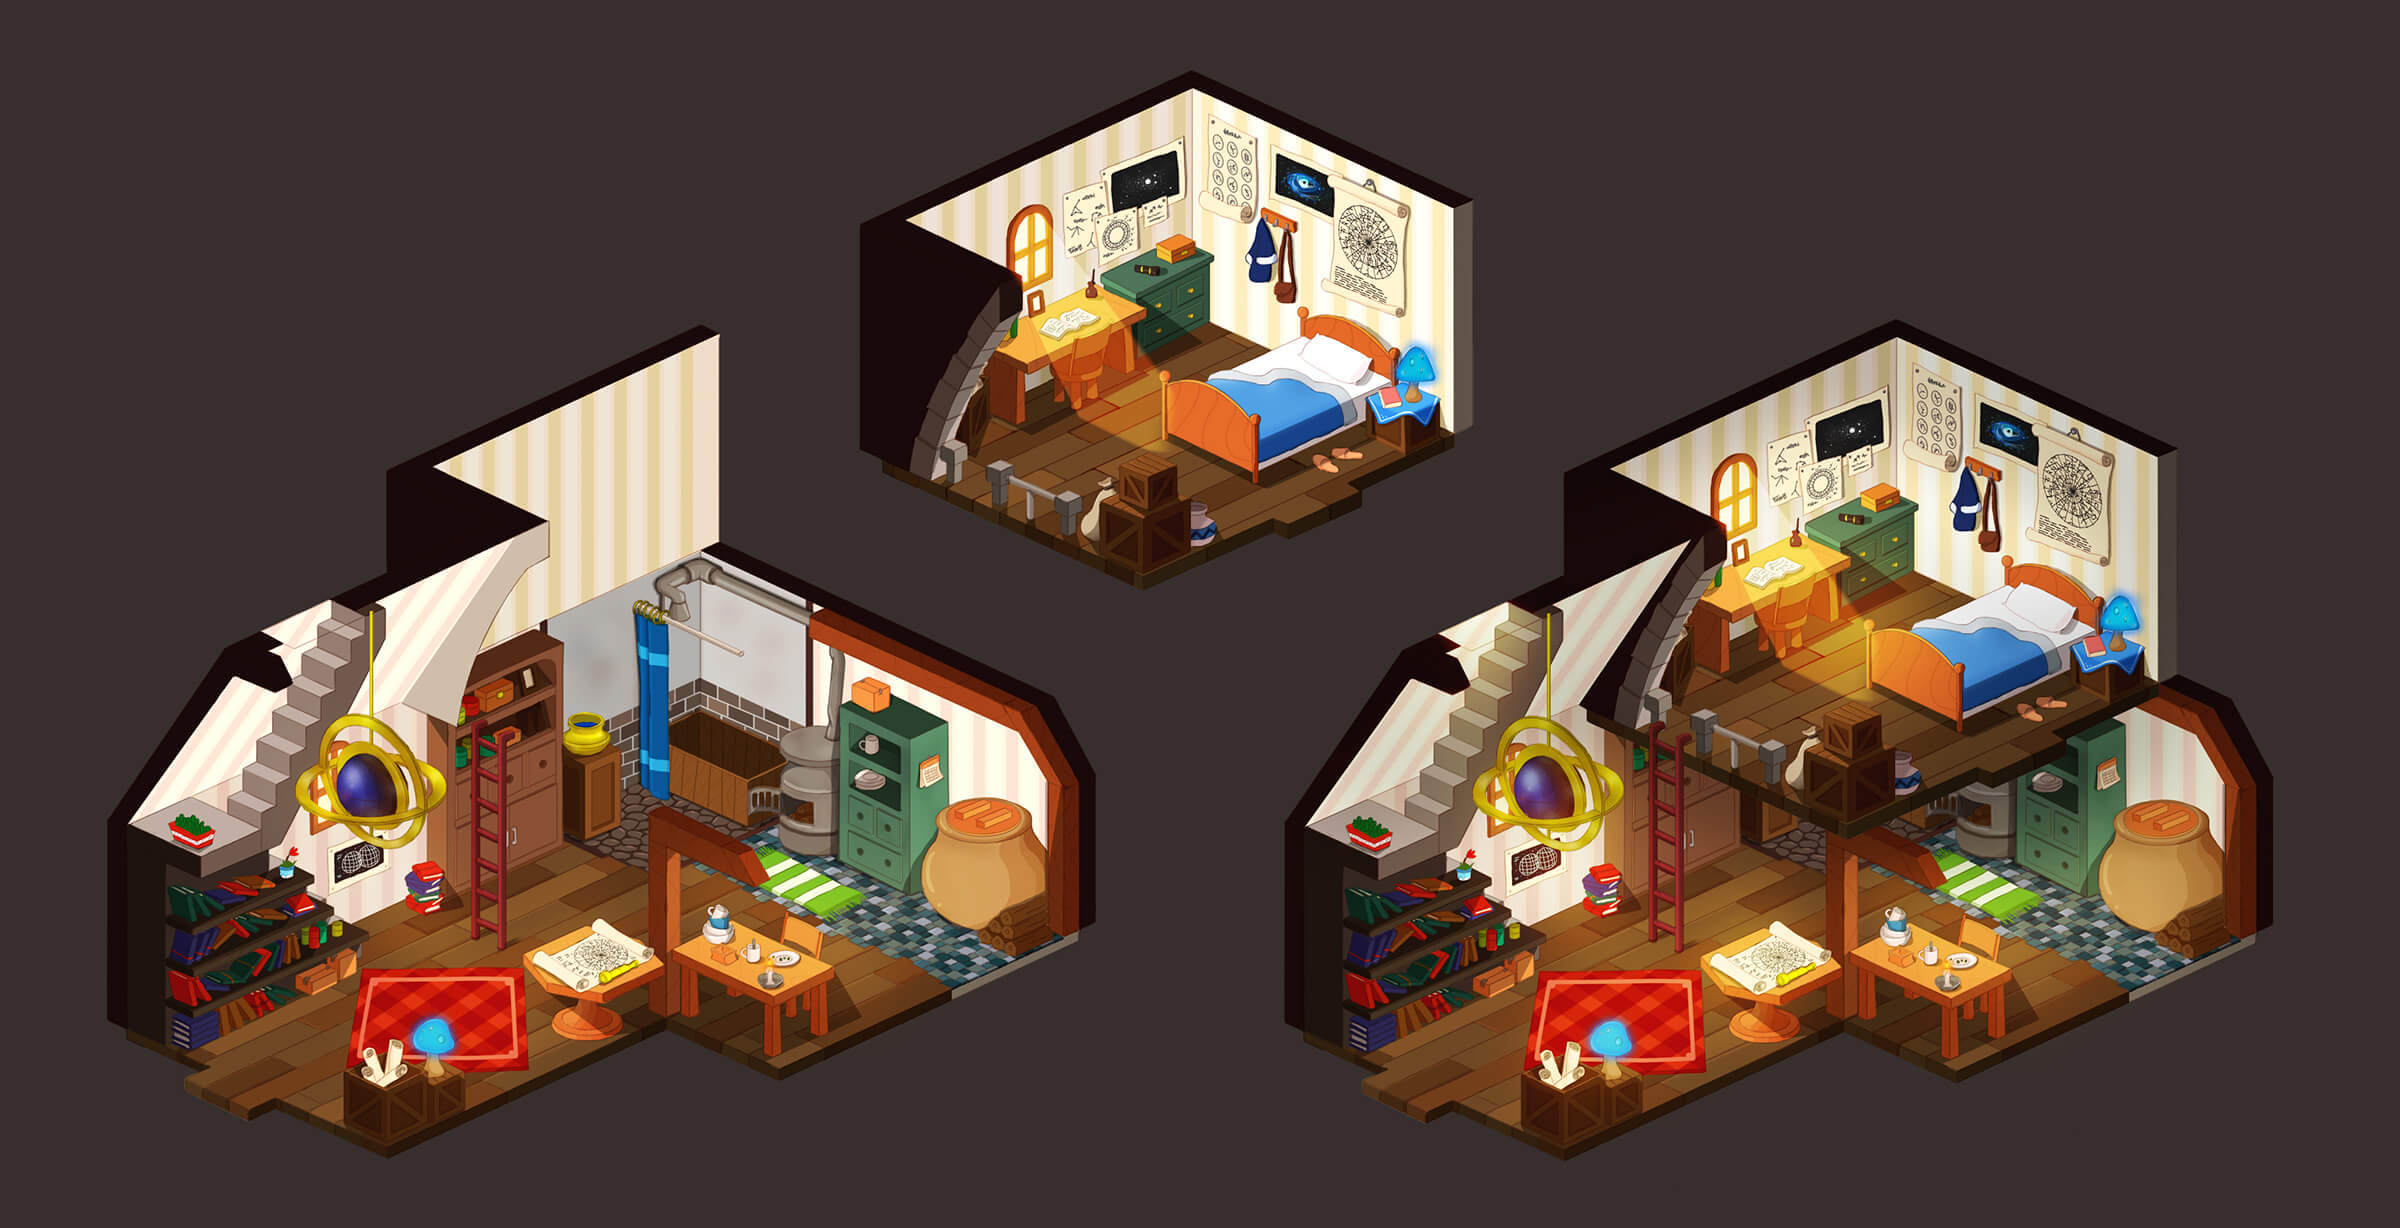 Isometric views of a bedroom and living room of a snug home with simple wooden furnishings and iron stove.